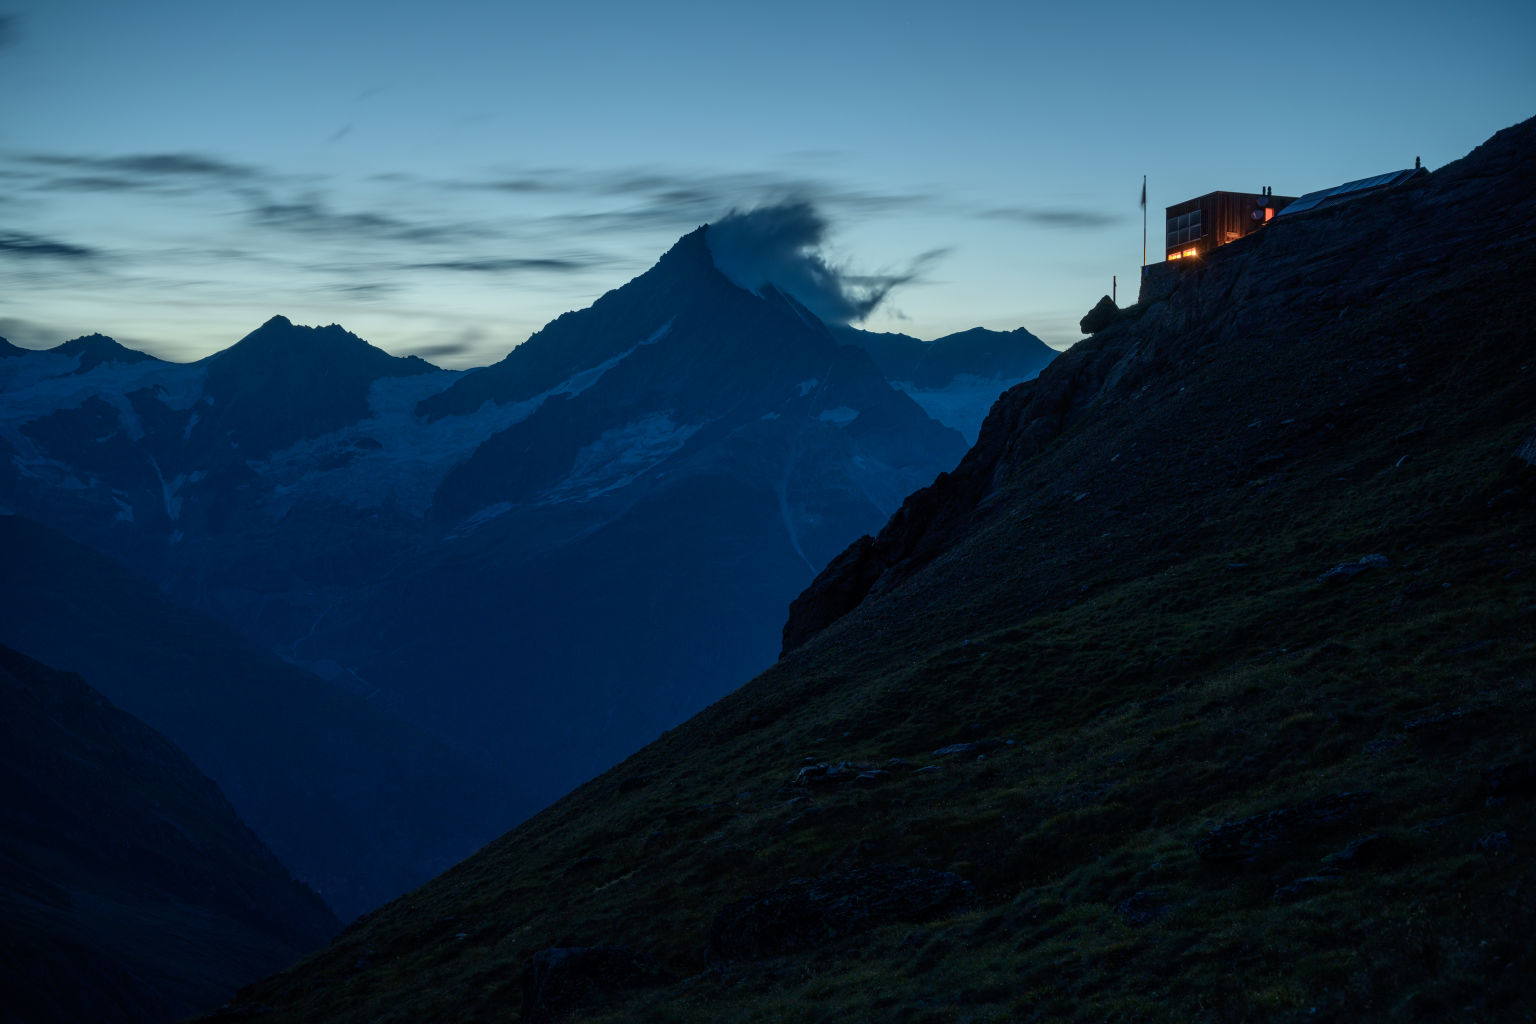 The Täschhütte mountain hut at sunset. In the distance, wreathed in cloud, the Weisshorn.